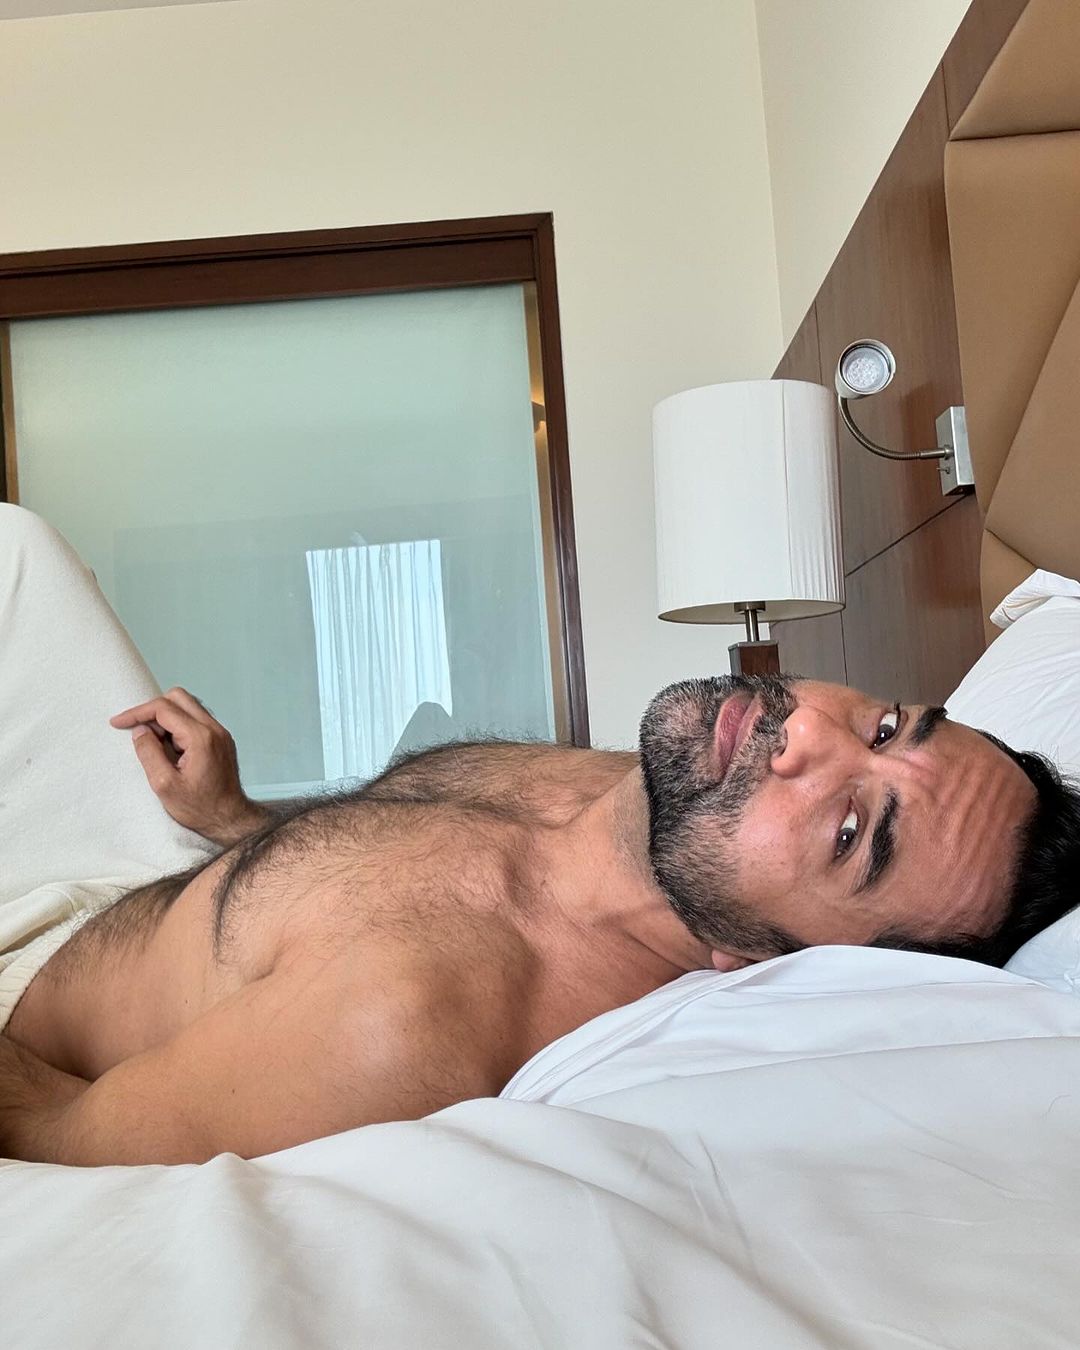 Abhay Deol, Abhay Deol shares raw and hairy photos, Abhay Deol new pics, Abhay Deol shares photos wearing nothing but a towel, Abhay Deol pics, Abhay Deol movies, Abhay Deol ranjhana, Abhay Deol upcoming movies, Abhay Deol dev d, Abhay Deol zindagi na milegi dobara, Abhay Deol father, Abhay Deol uncle, Abhay Deol brothers, Abhay Deol sister, Abhay Deol wedding Abhay Deol towel pics